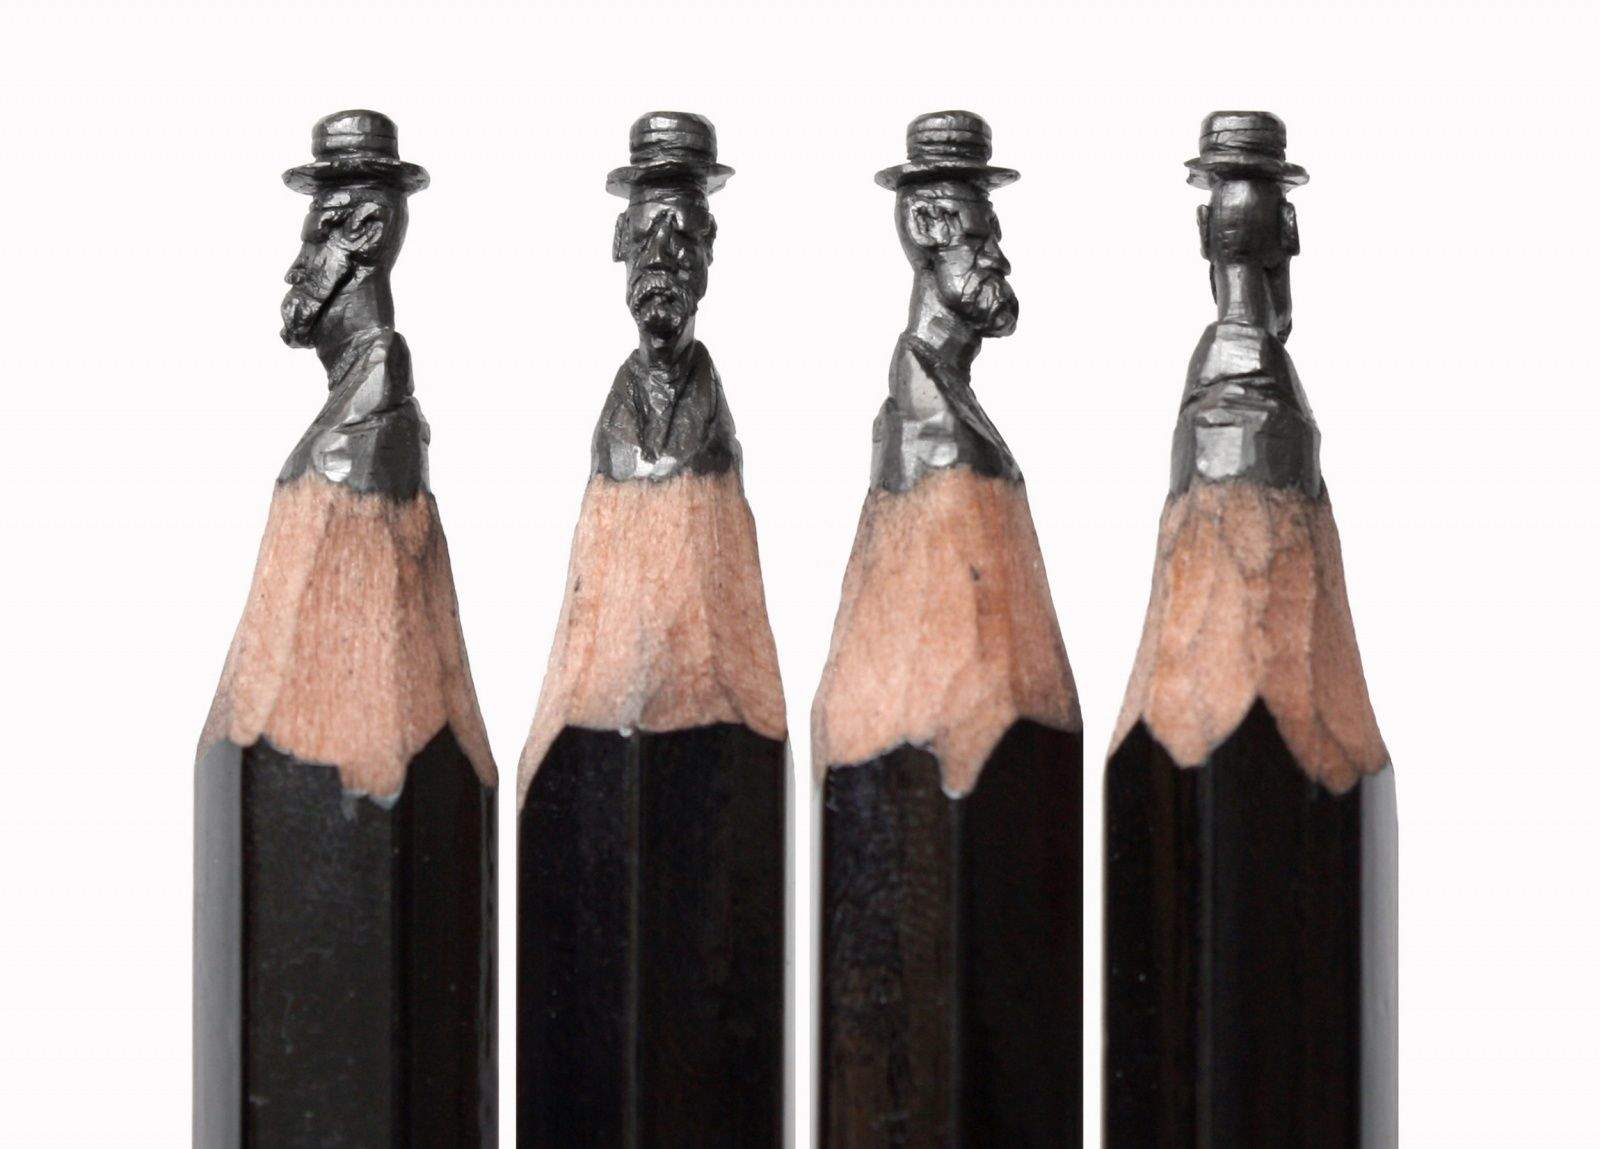 Russian artist Photo: Salavat Fidai carves detailed sculptures into the point of a pencil lead. Photo: Photo: Salavat Fidai